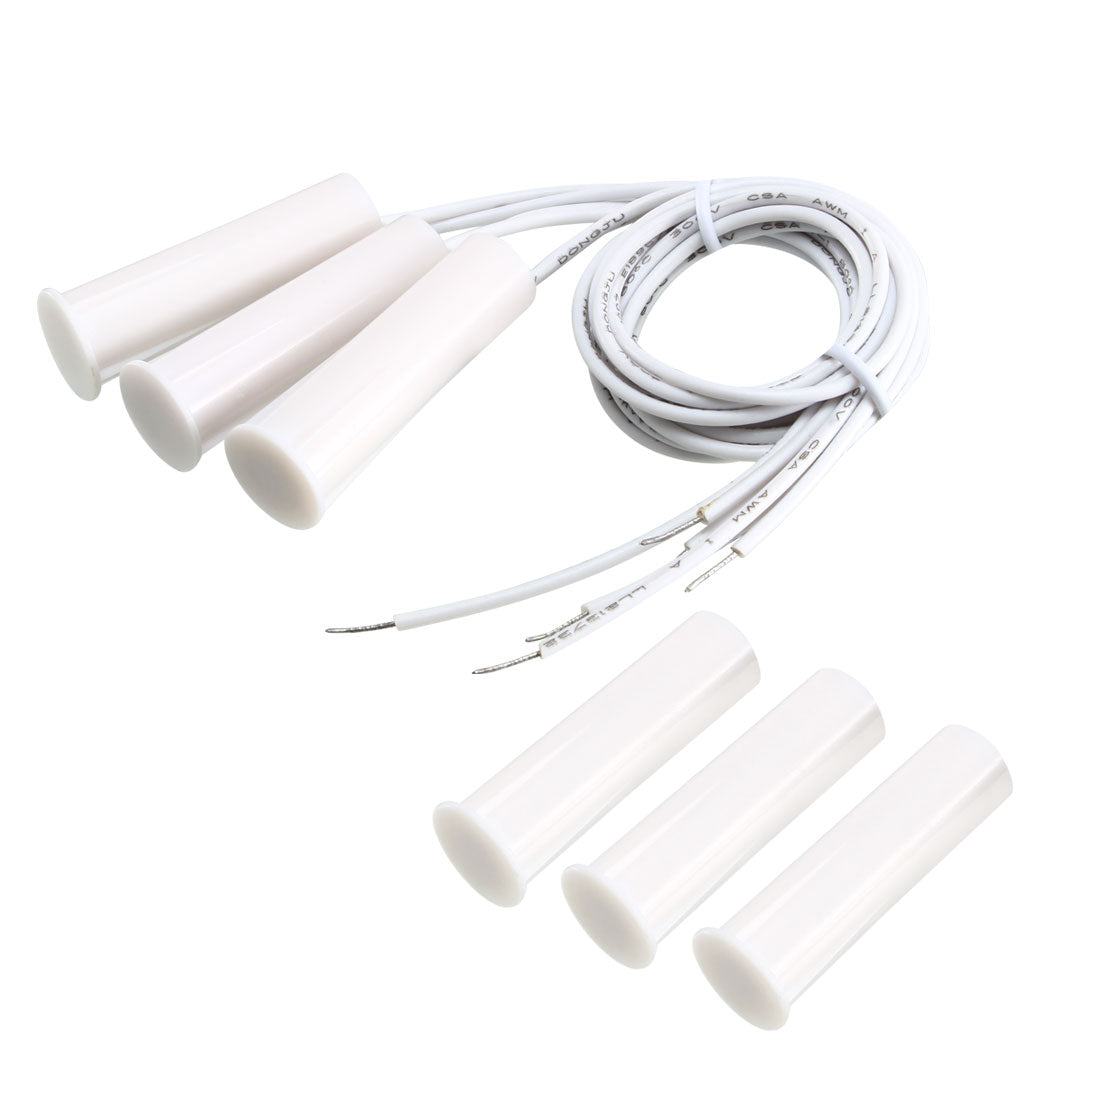 uxcell Uxcell 3pcs RC-35 NC Nomally Closed Recessed Wired Security Window Contact Sensor Alarm Magnetic Reed Switch Equipment White